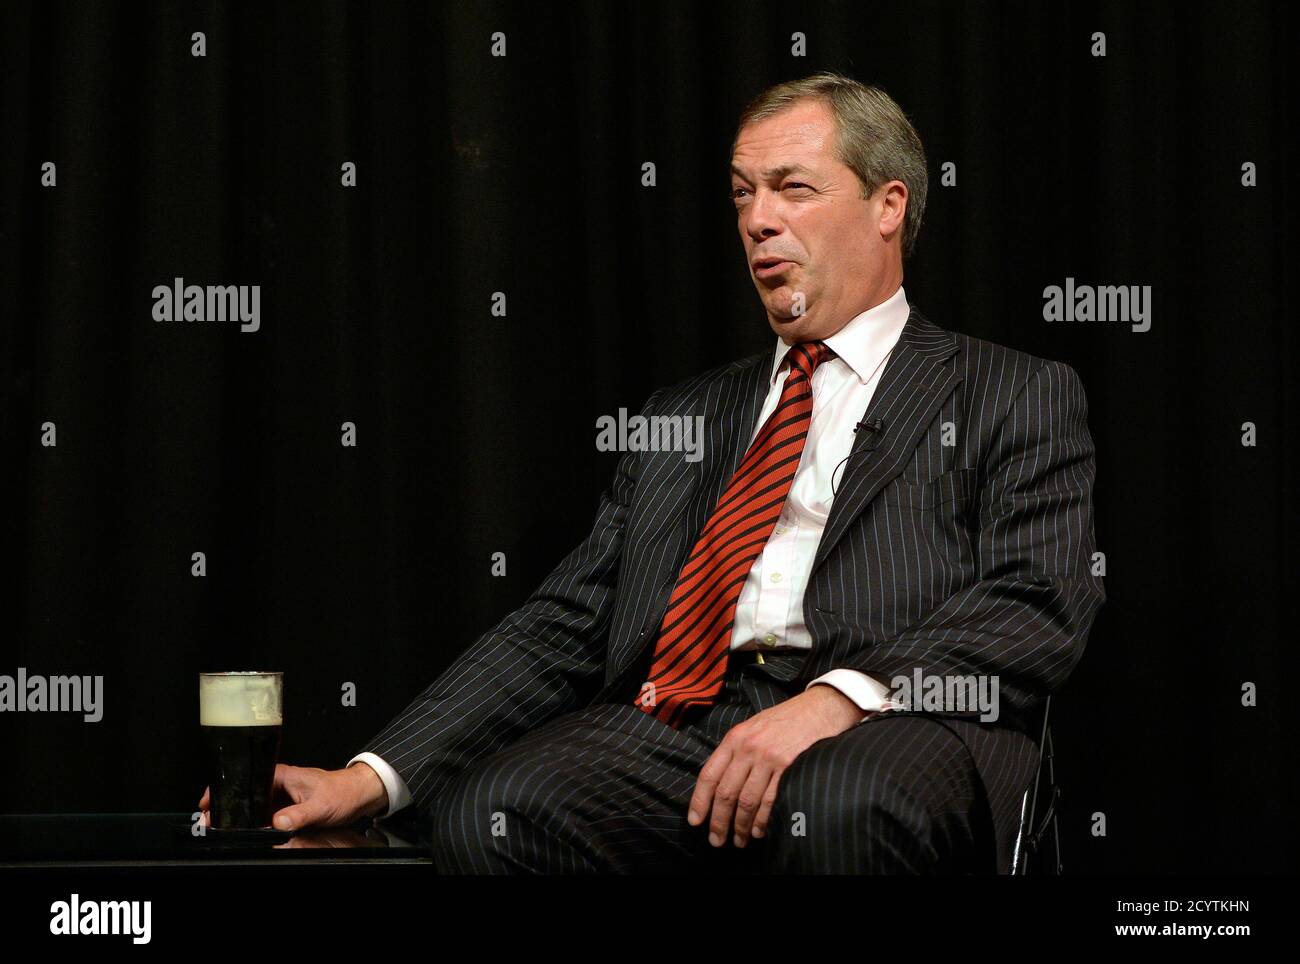 Leader of the UK Independence Party (UKIP) Nigel Farage drinks a pint of stout ale whilst speaking at a question and answer session in Manchester, northern England, September 30, 2013. REUTERS/Toby Melville (BRITAIN - Tags: POLITICS) Stock Photo